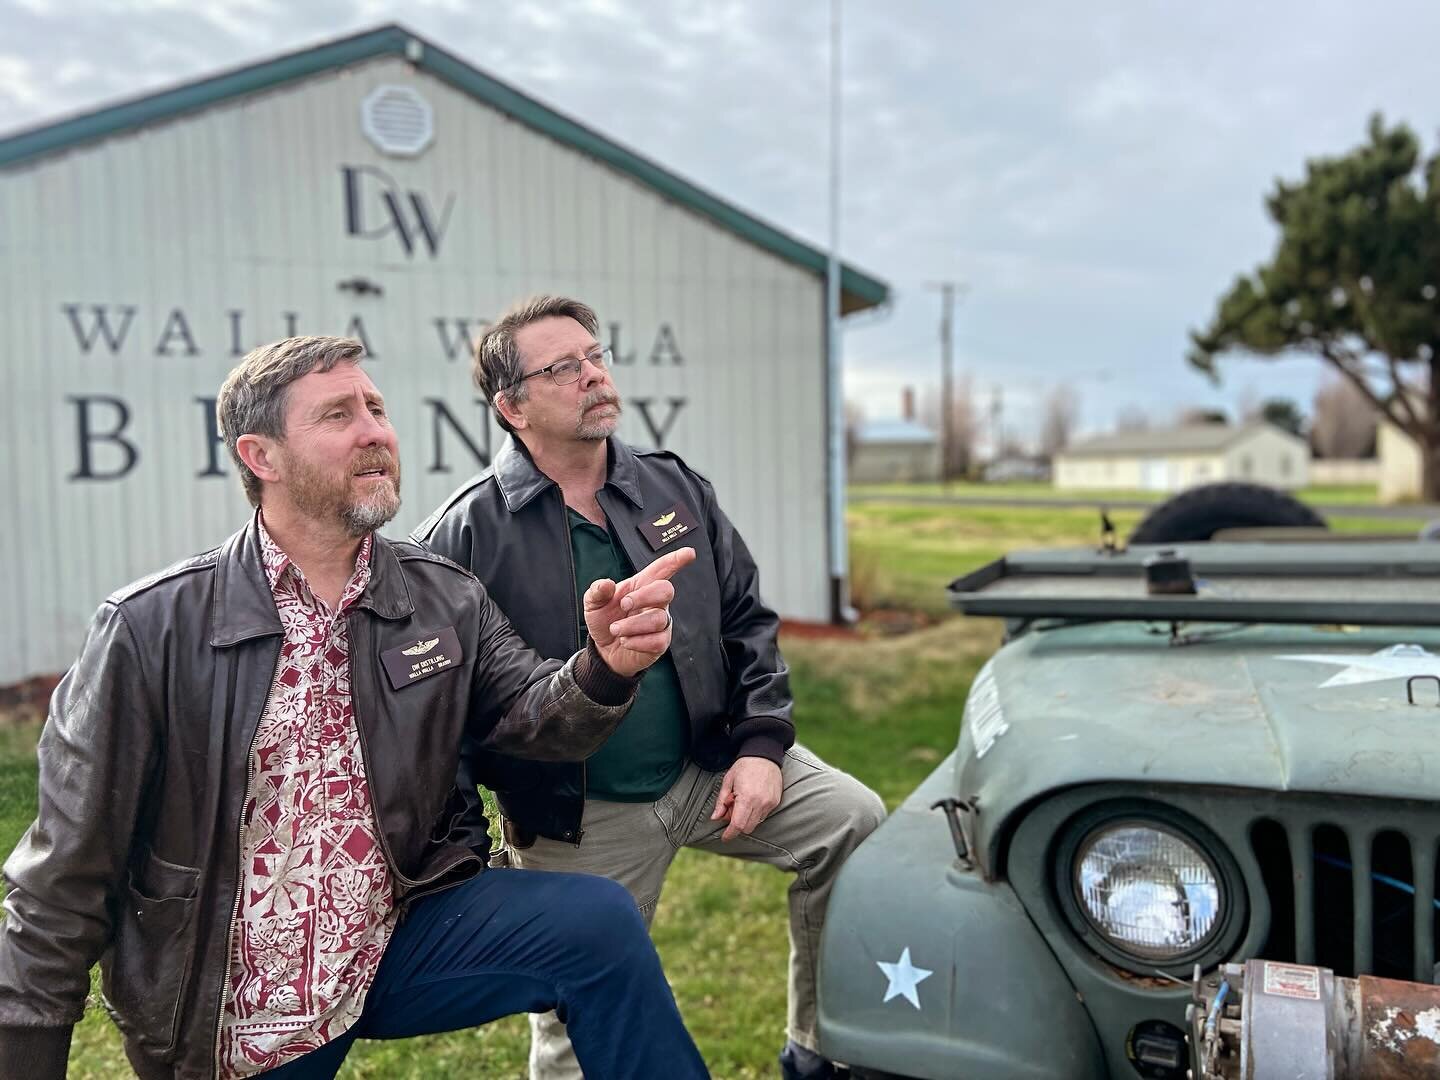 What&rsquo;s that over there? OH NOTHING JUST OUR TASTING ROOM REOPENING EVERY FRIDAY AND SATURDAY 1-5! Come pay us a visit!
#brandy #wallawalla